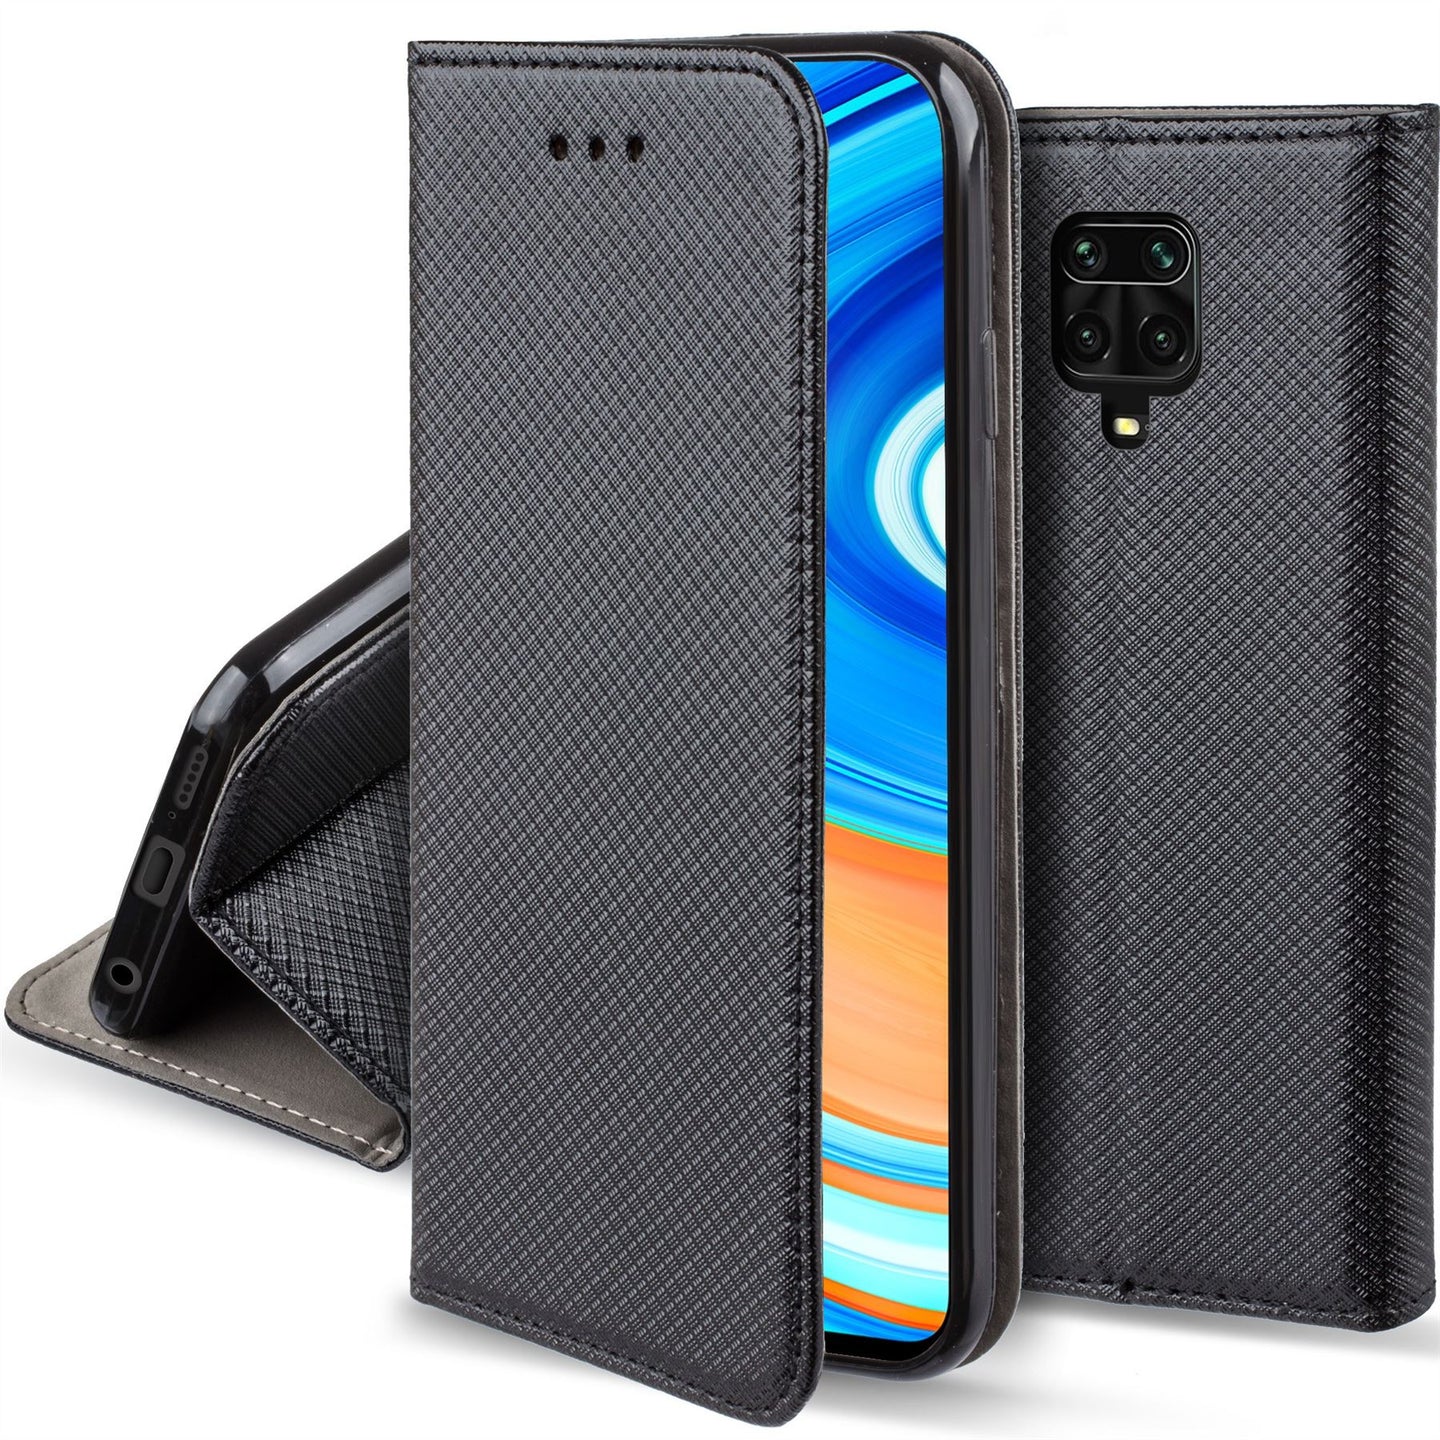 Moozy Case Flip Cover for Xiaomi Redmi Note 9S and Xiaomi Redmi Note 9 Pro, Black - Smart Magnetic Flip Case with Card Holder and Stand